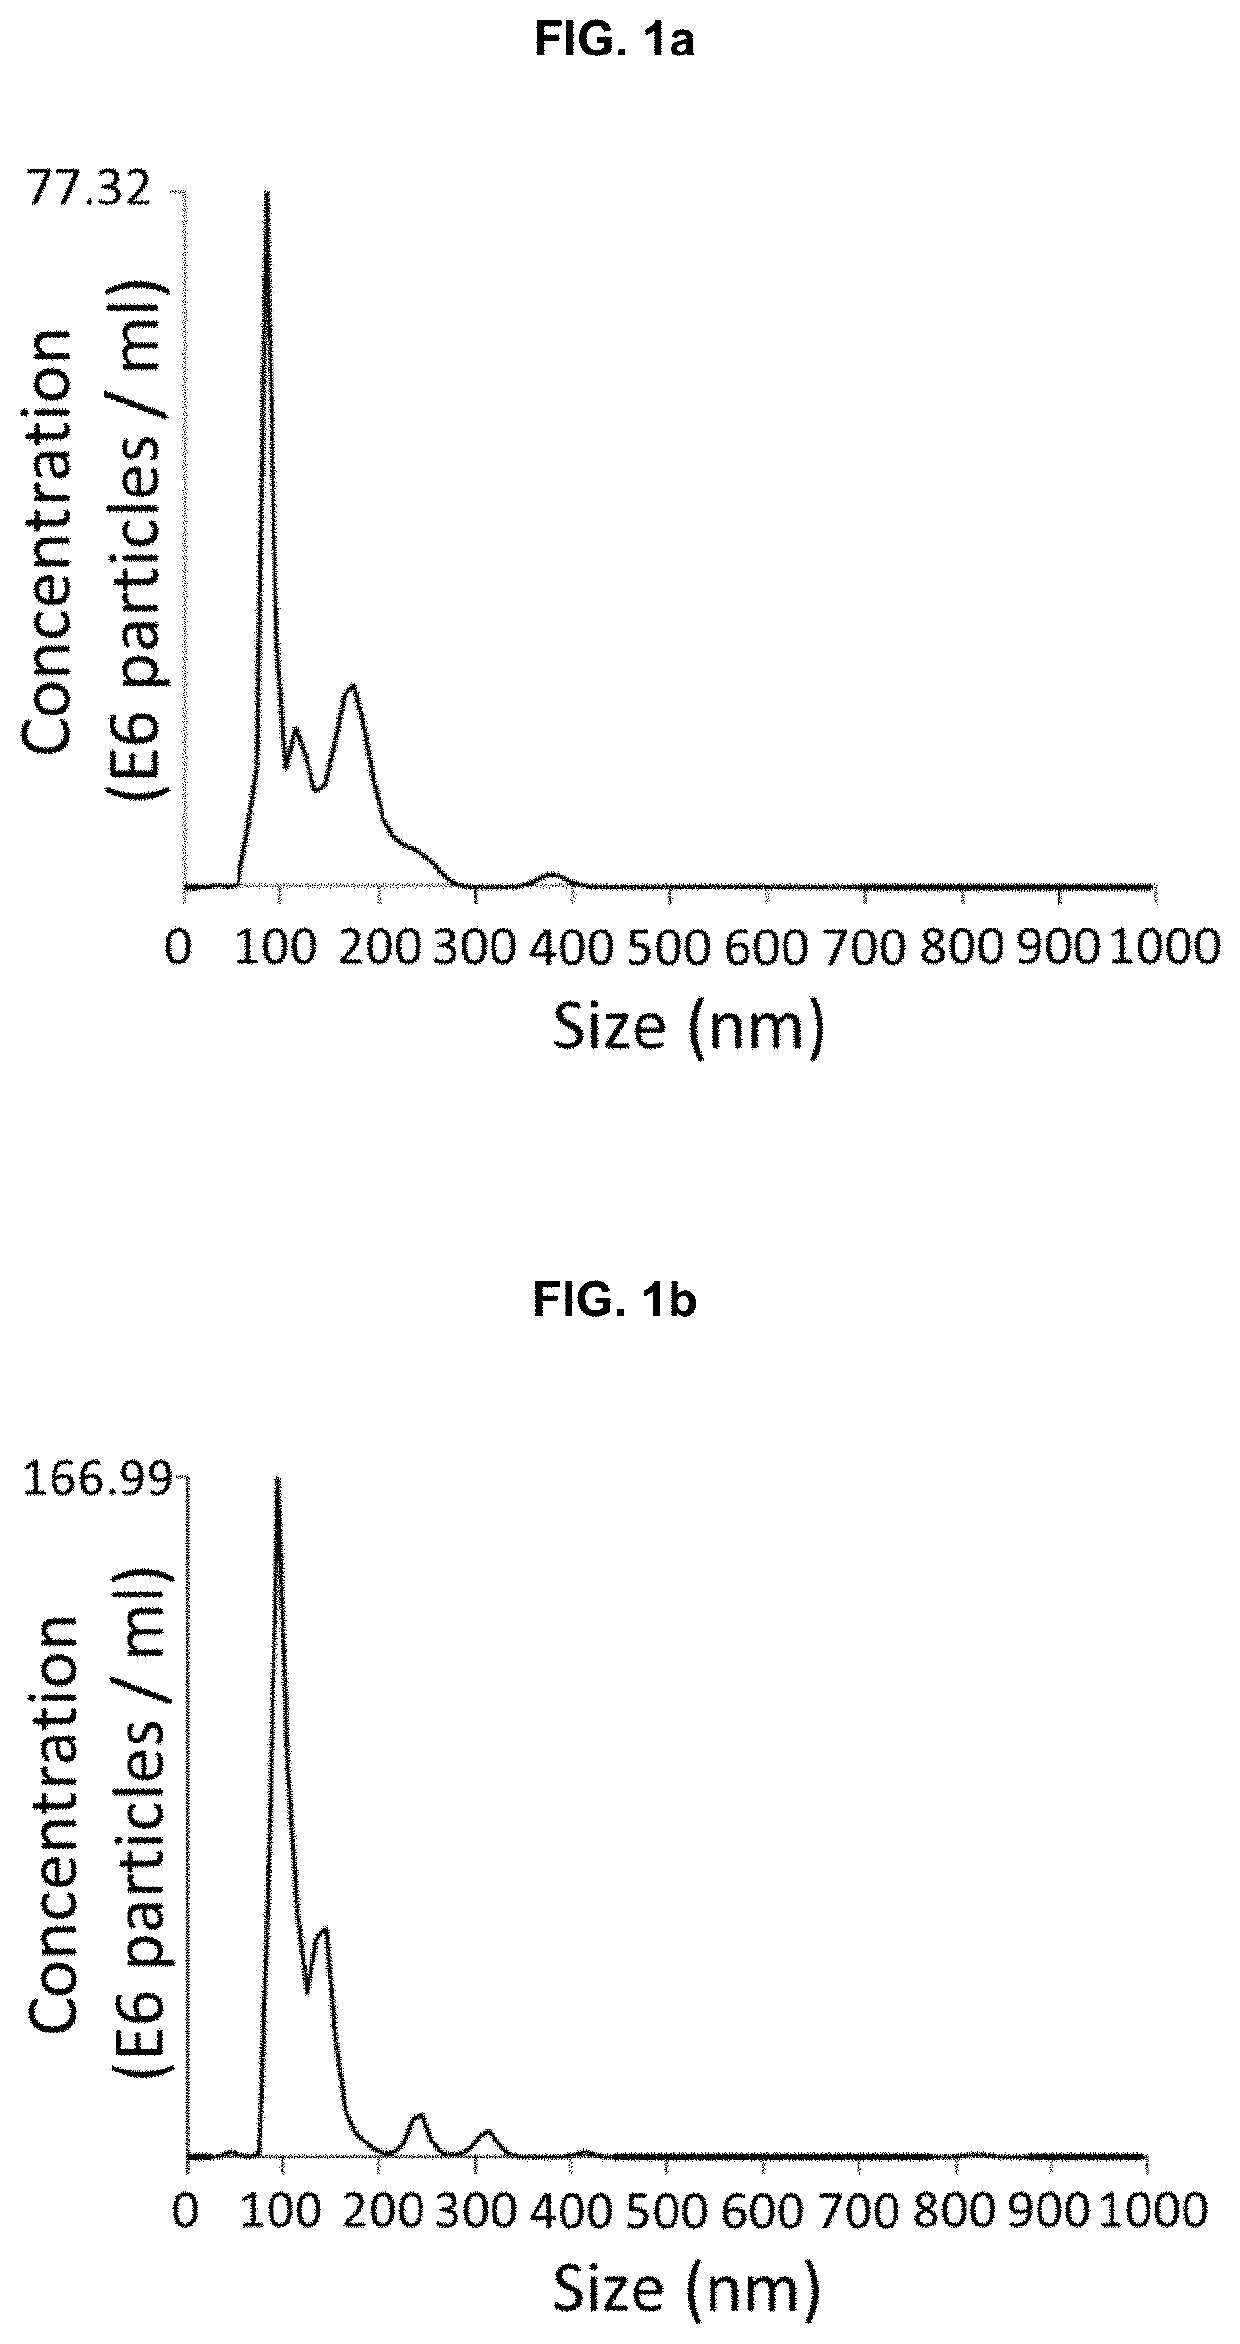 Method for ameliorating or treating a bowel disease